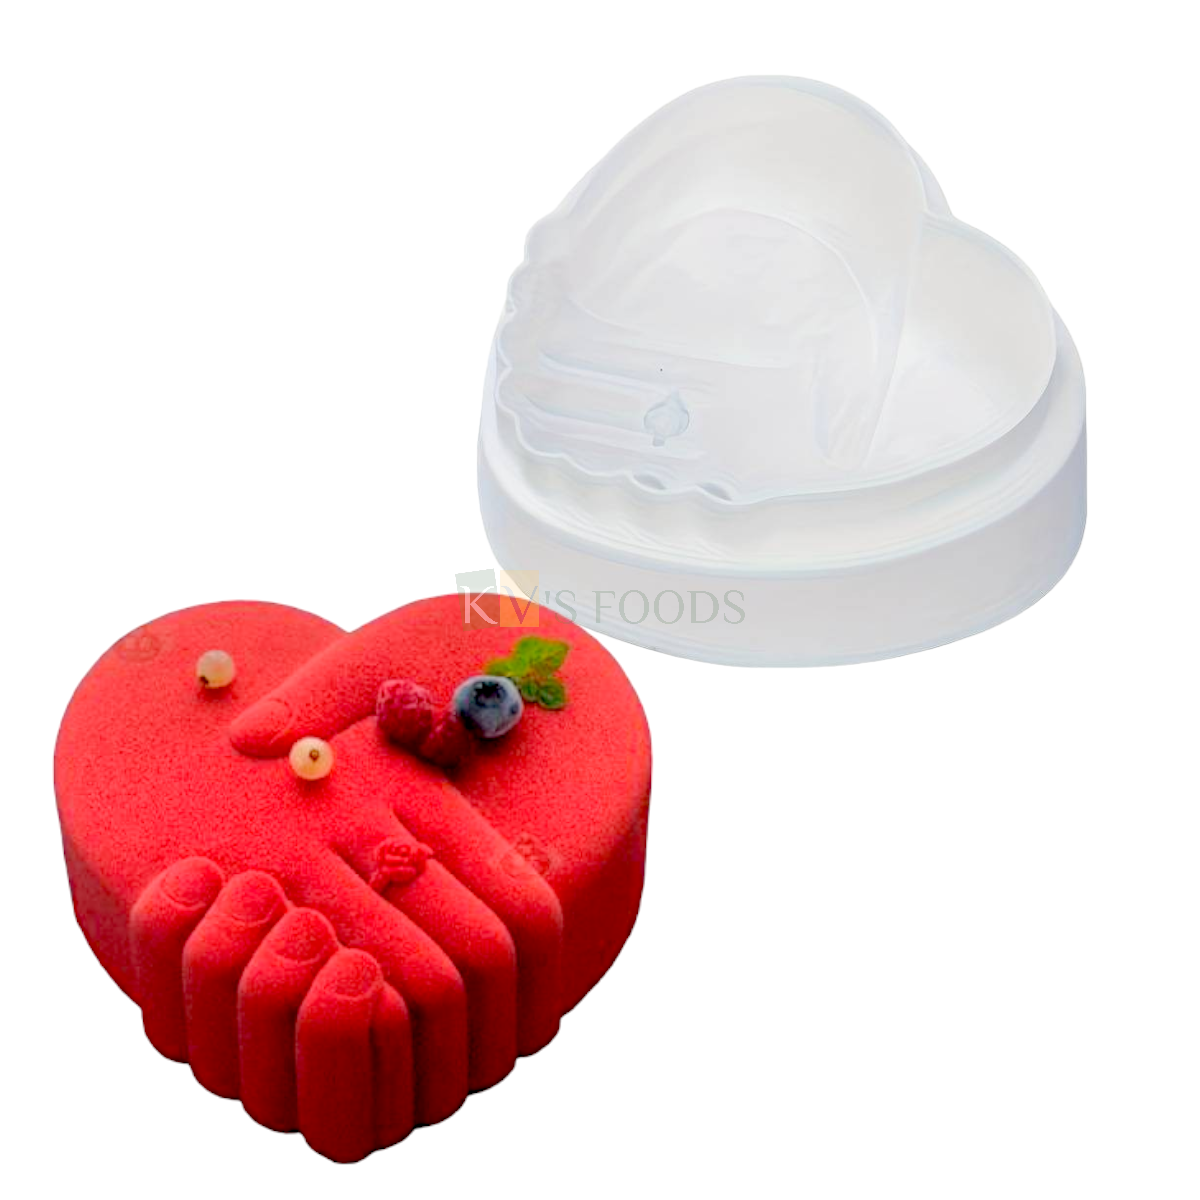 1 PC Silicone Entremets Romantic Valentine's Day Hand in Hand Cake Mould, Heart Shape Cake Valentine's Day Mousse Cake Classic French Heart Cake Moulds DIY Cake Decorating Molds